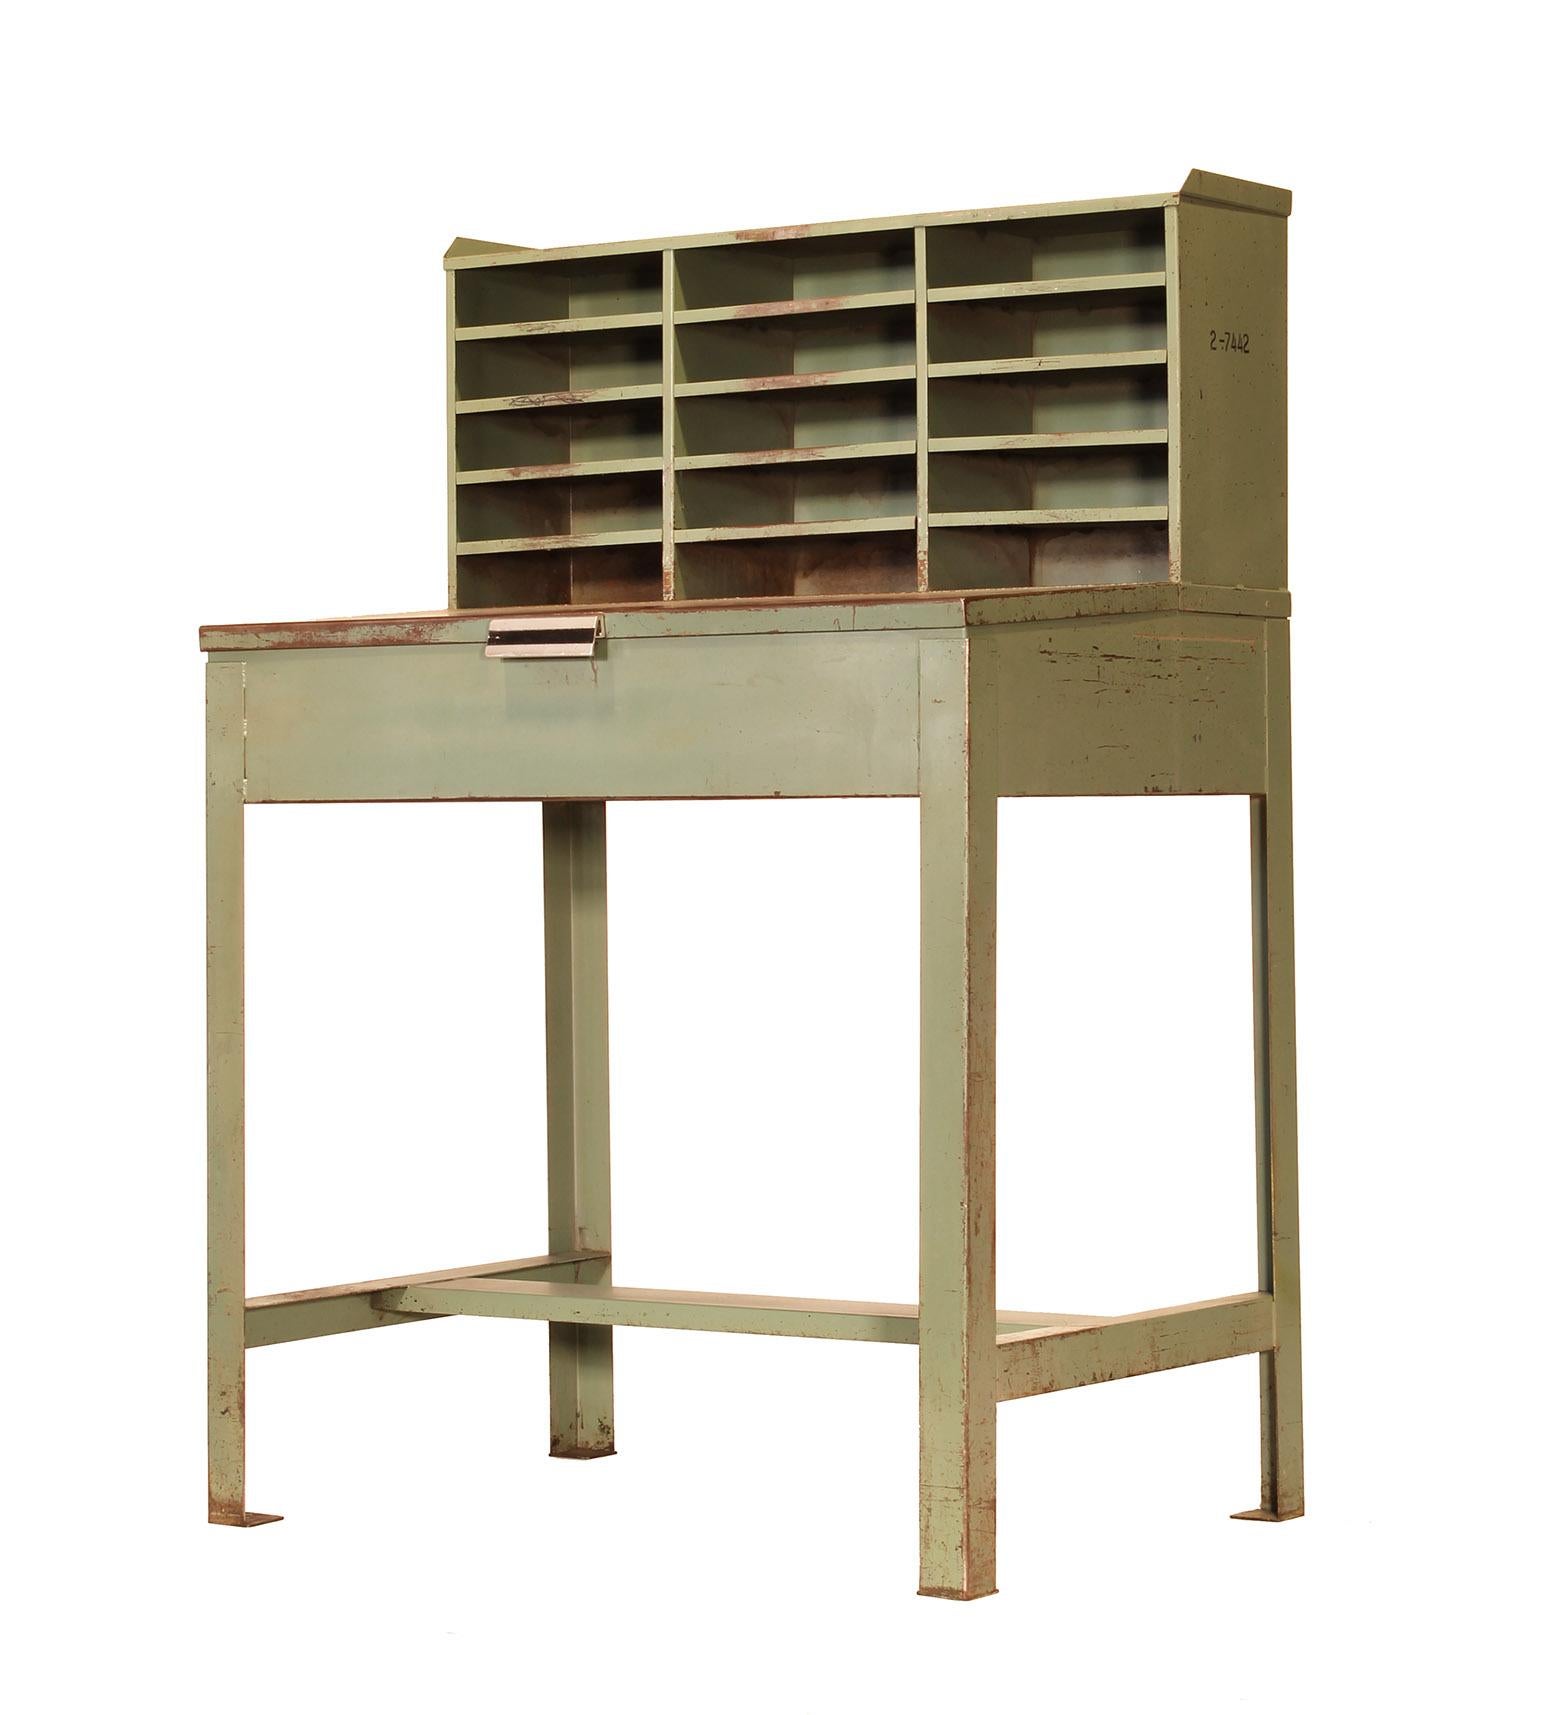 Authentic vintage Industrial distressed shop factory metal / steel foreman's work / mail sorting or postal desk / table. Fully functional with 15 cubby holes for storage, wear commensurate with age. Aluminum handle. Inside drawer features some